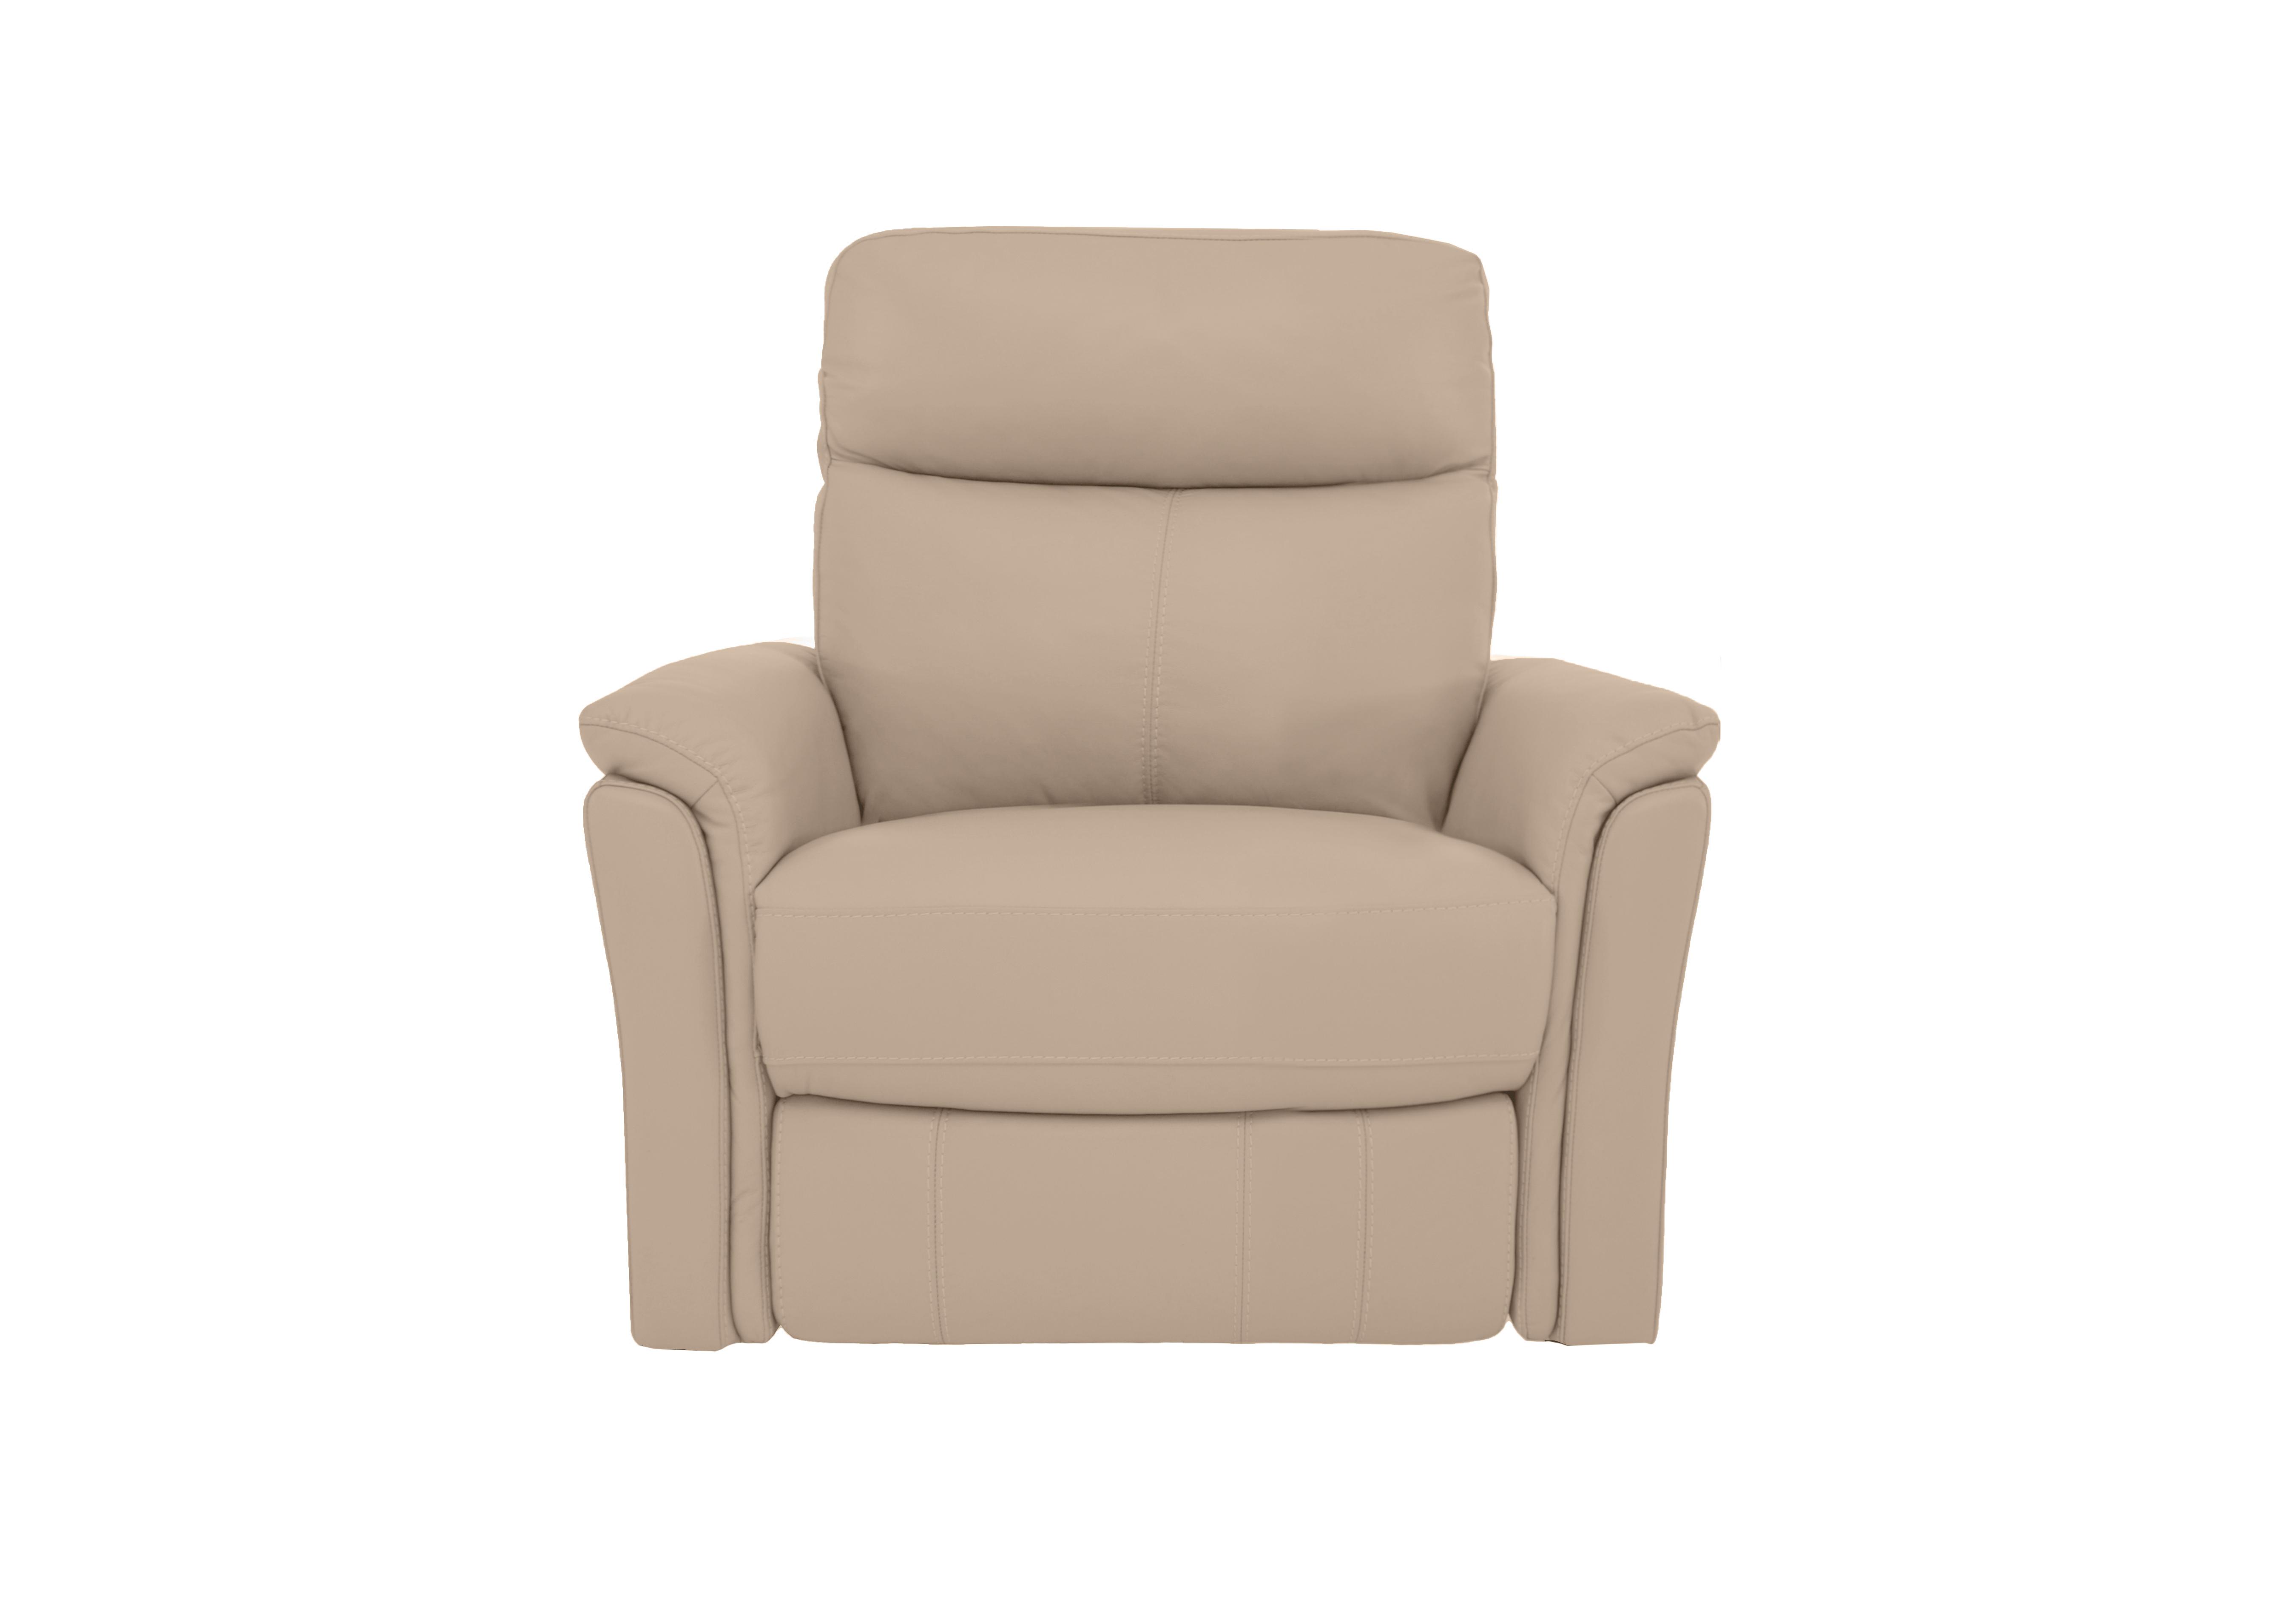 Compact Collection Piccolo Recliner Armchair in Bv-039c Pebble on Furniture Village